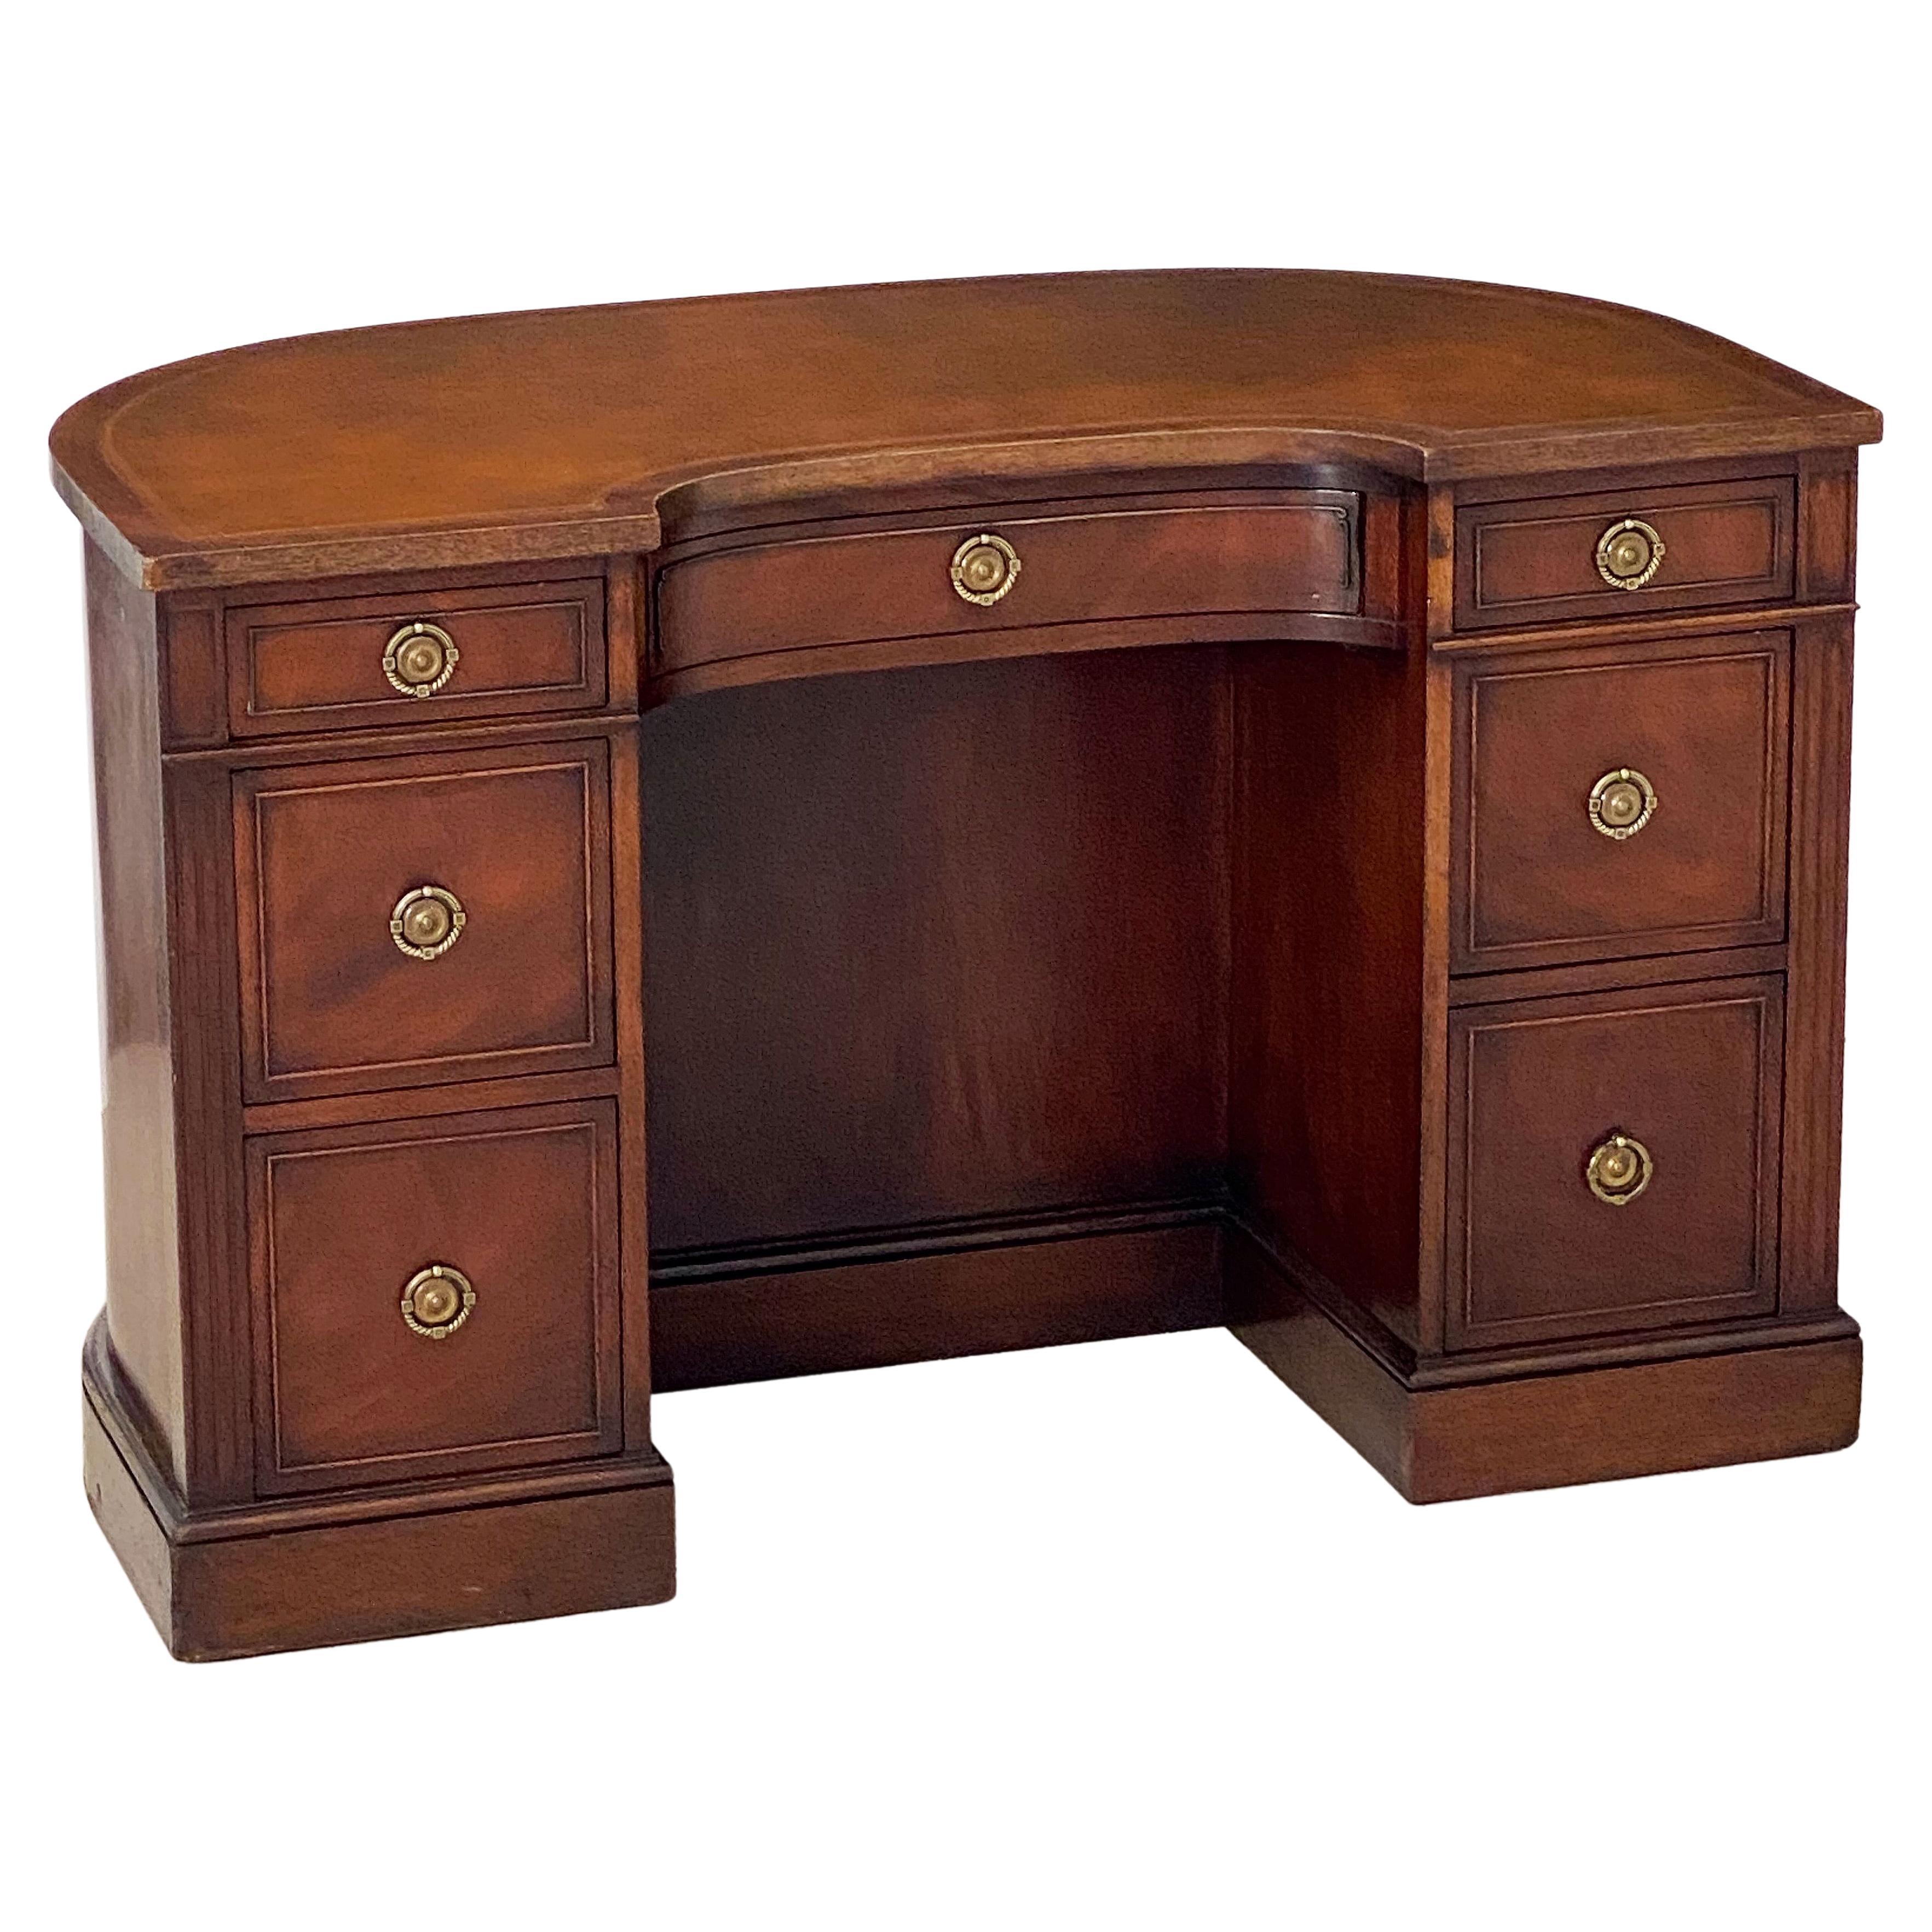 English Kidney Shaped Kneehole Writing Desk of Mahogany with Leather Top